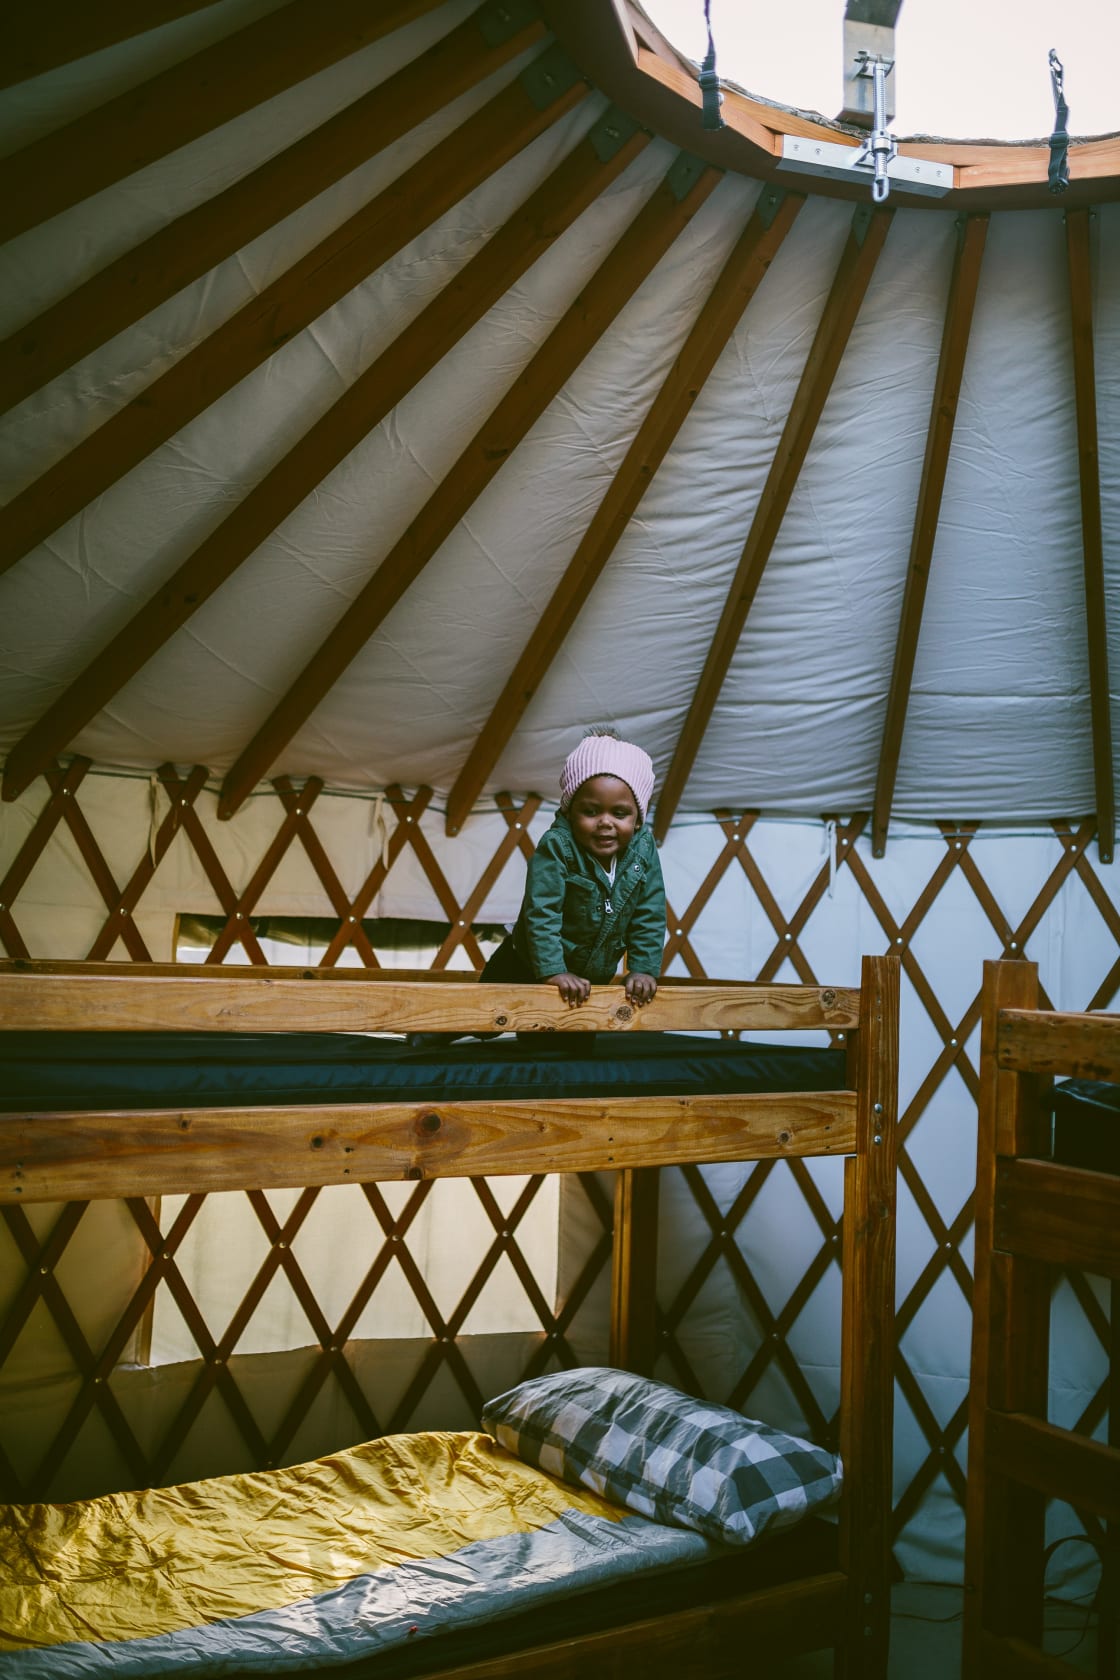 Very nice bunk beds  in the yurts